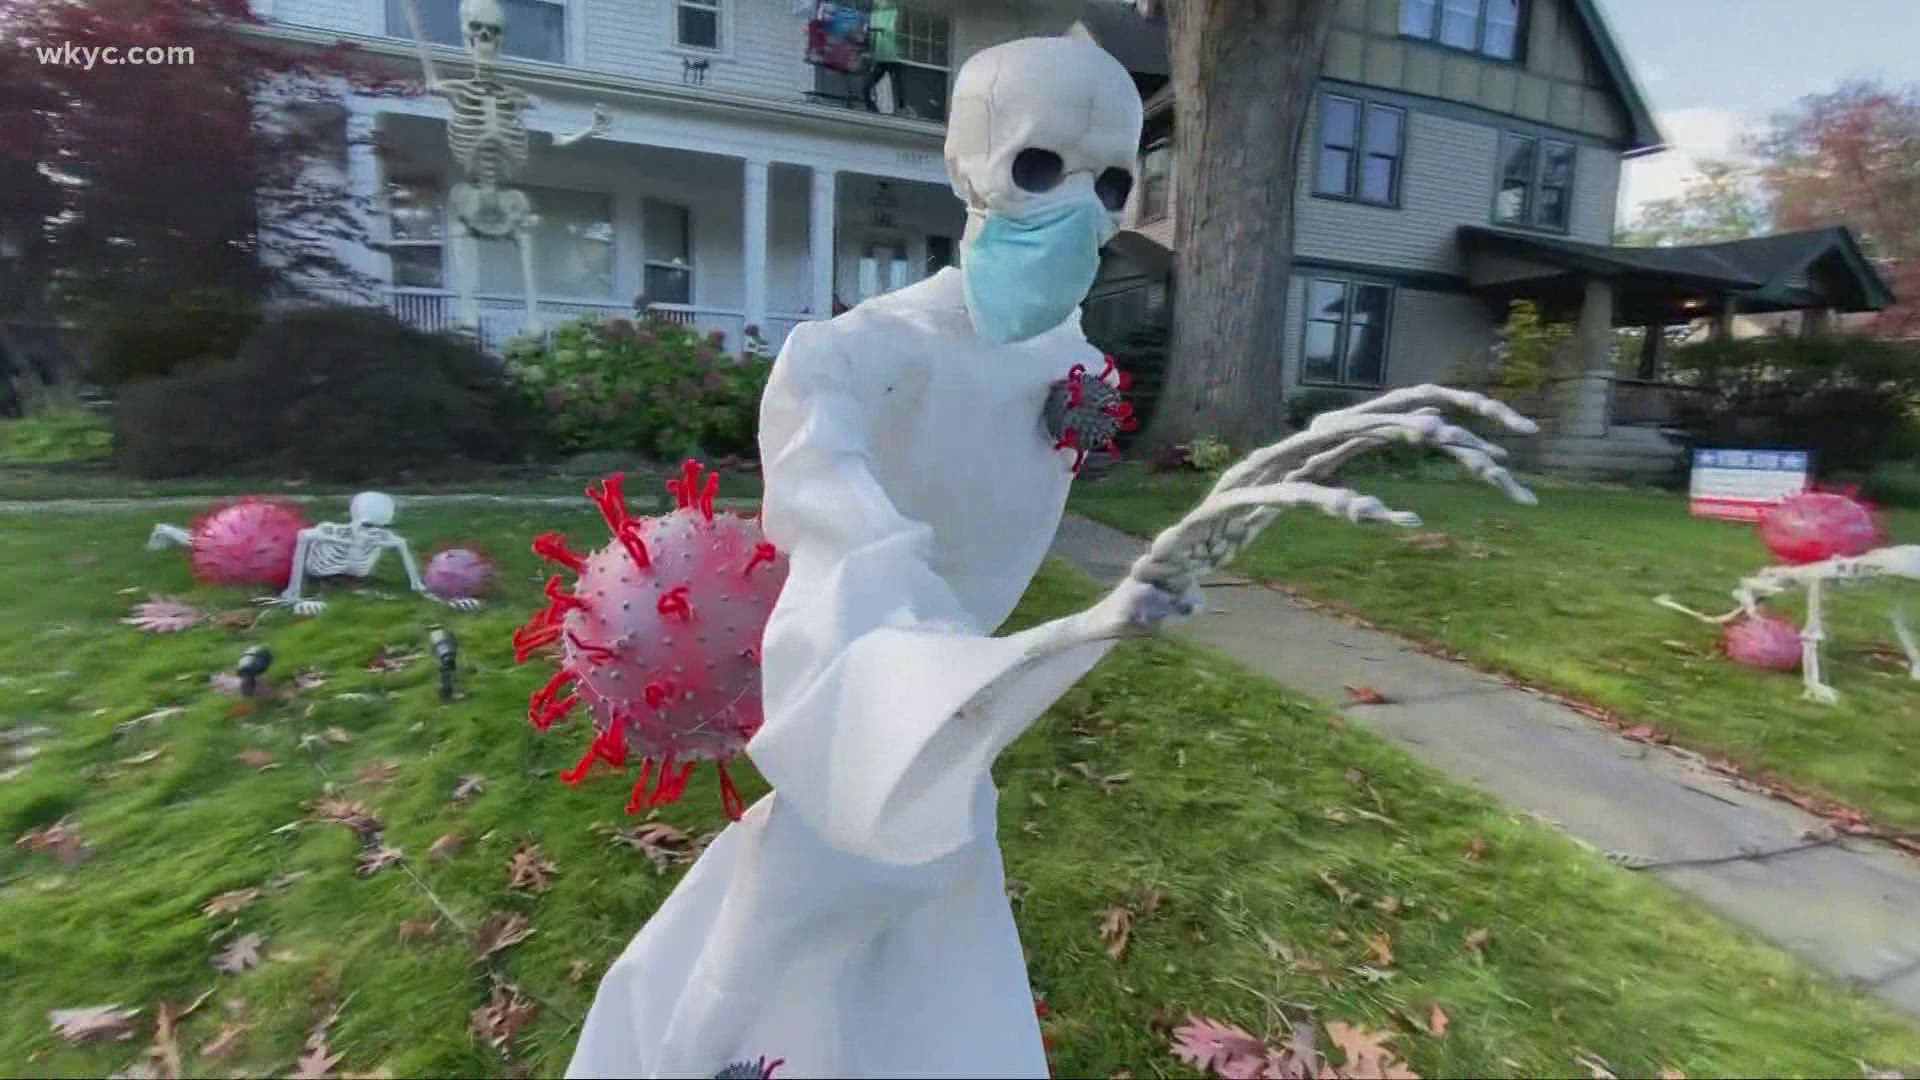 Oct. 20, 2020: This Cleveland house is turning heads in a big way. They've decorated for Halloween using skeletons and some COVID-19 satire.